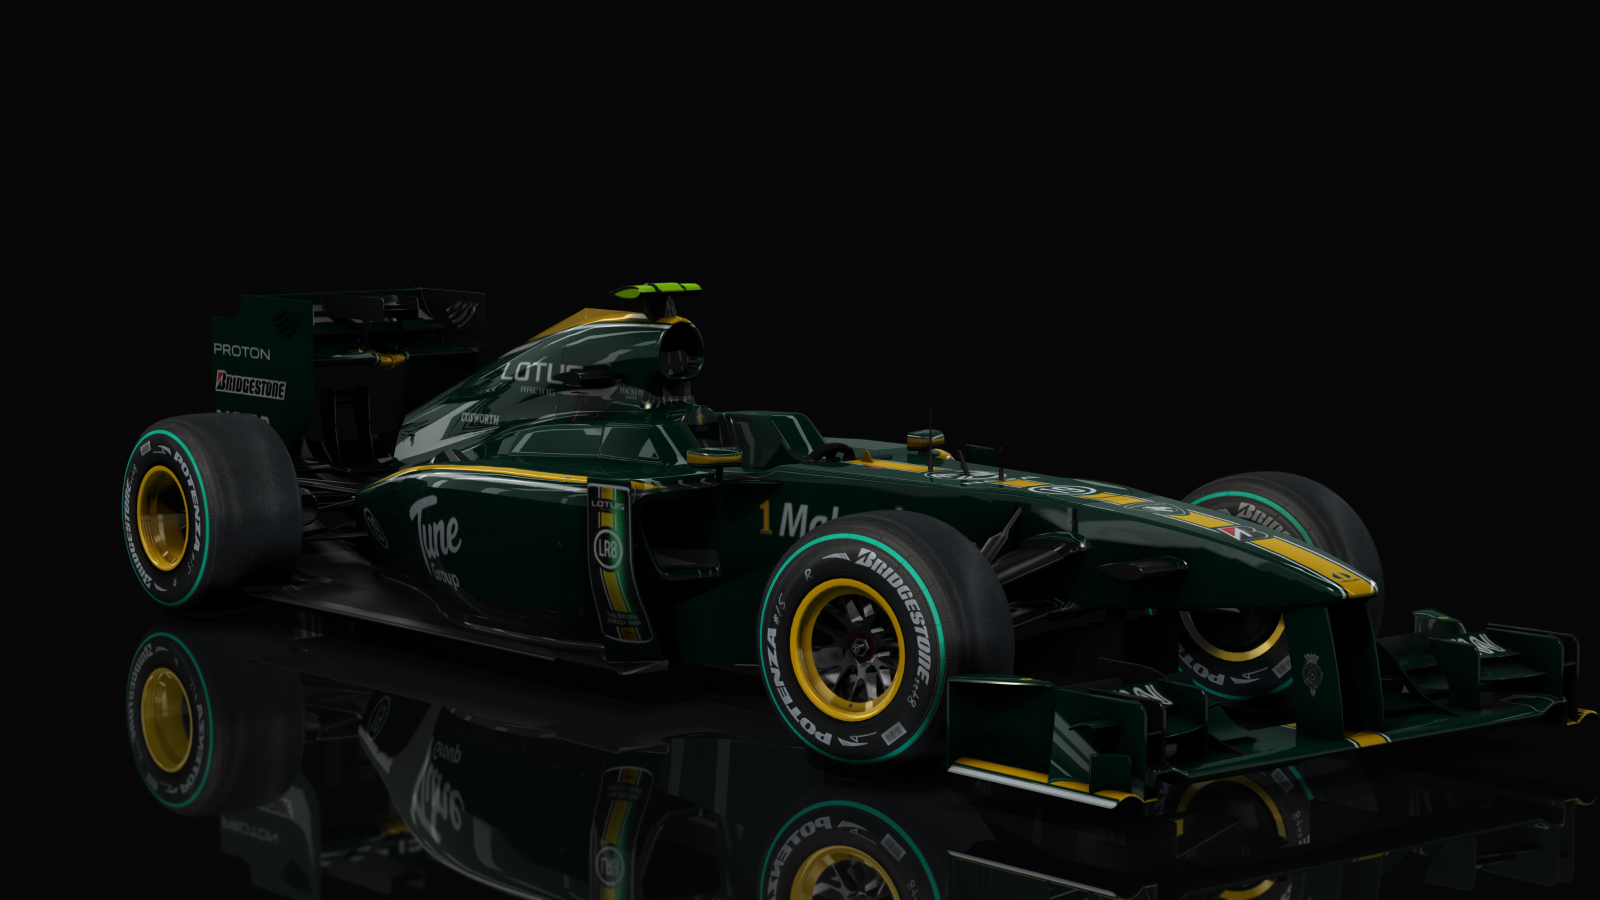 F1 2010 - Lotus T127 Preview Image